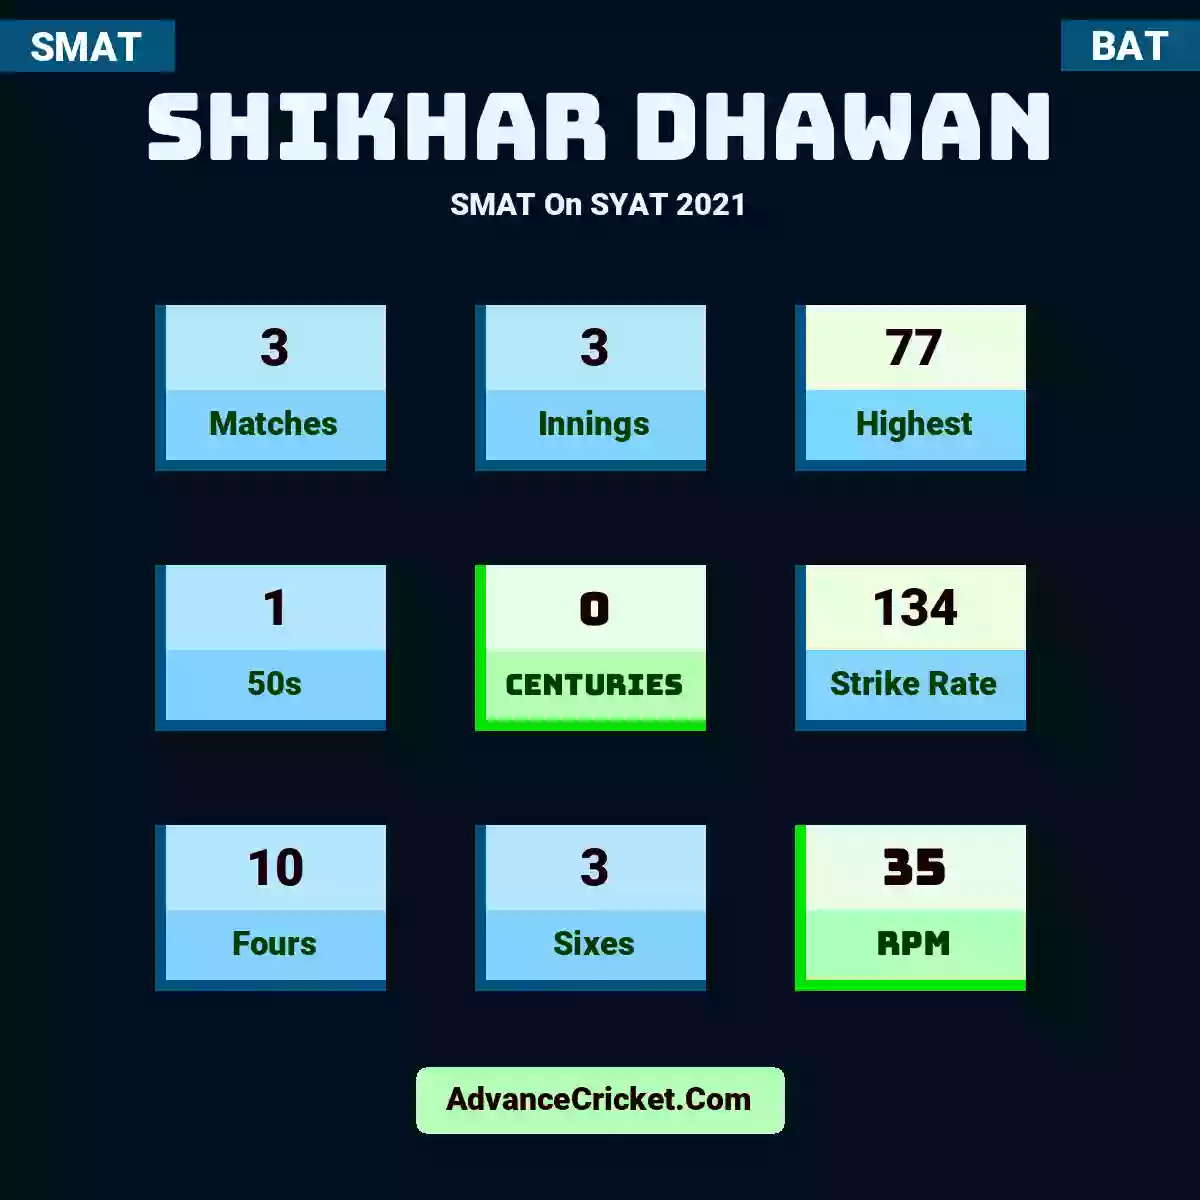 Shikhar Dhawan SMAT  On SYAT 2021, Shikhar Dhawan played 3 matches, scored 77 runs as highest, 1 half-centuries, and 0 centuries, with a strike rate of 134. S.Dhawan hit 10 fours and 3 sixes, with an RPM of 35.